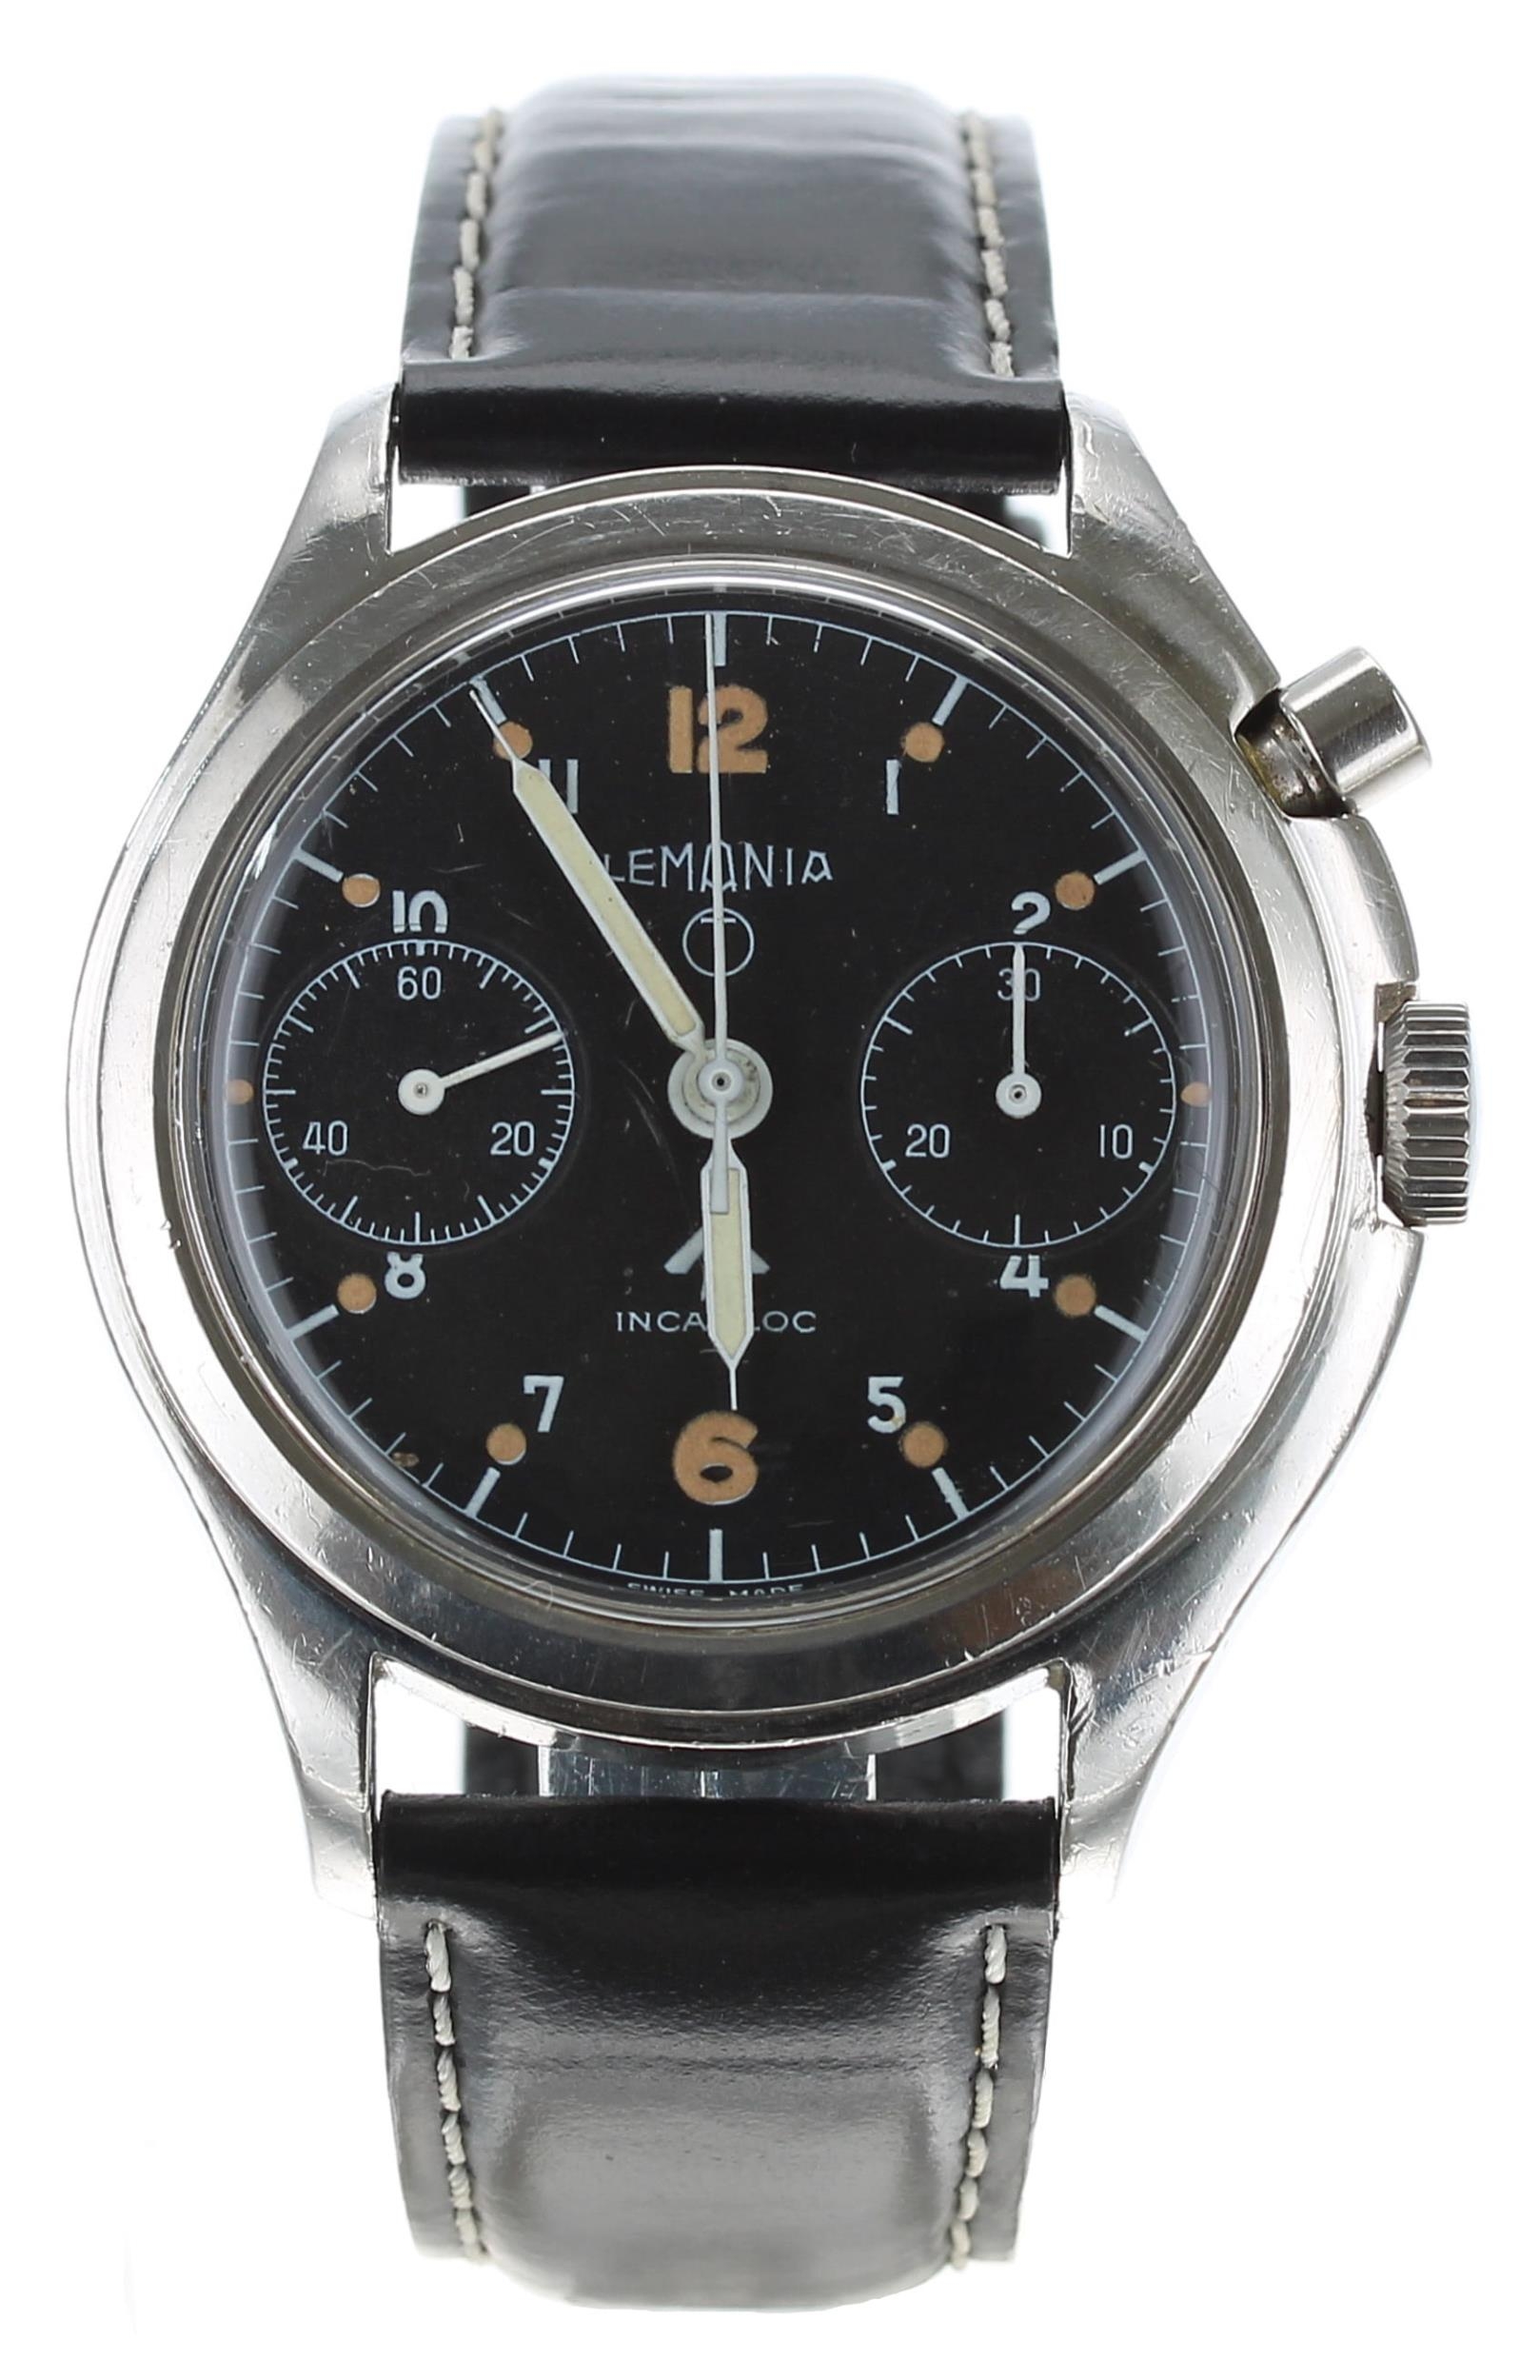 Rare Lemania British Ministry of Aviation Pilot's single button chronograph stainless steel